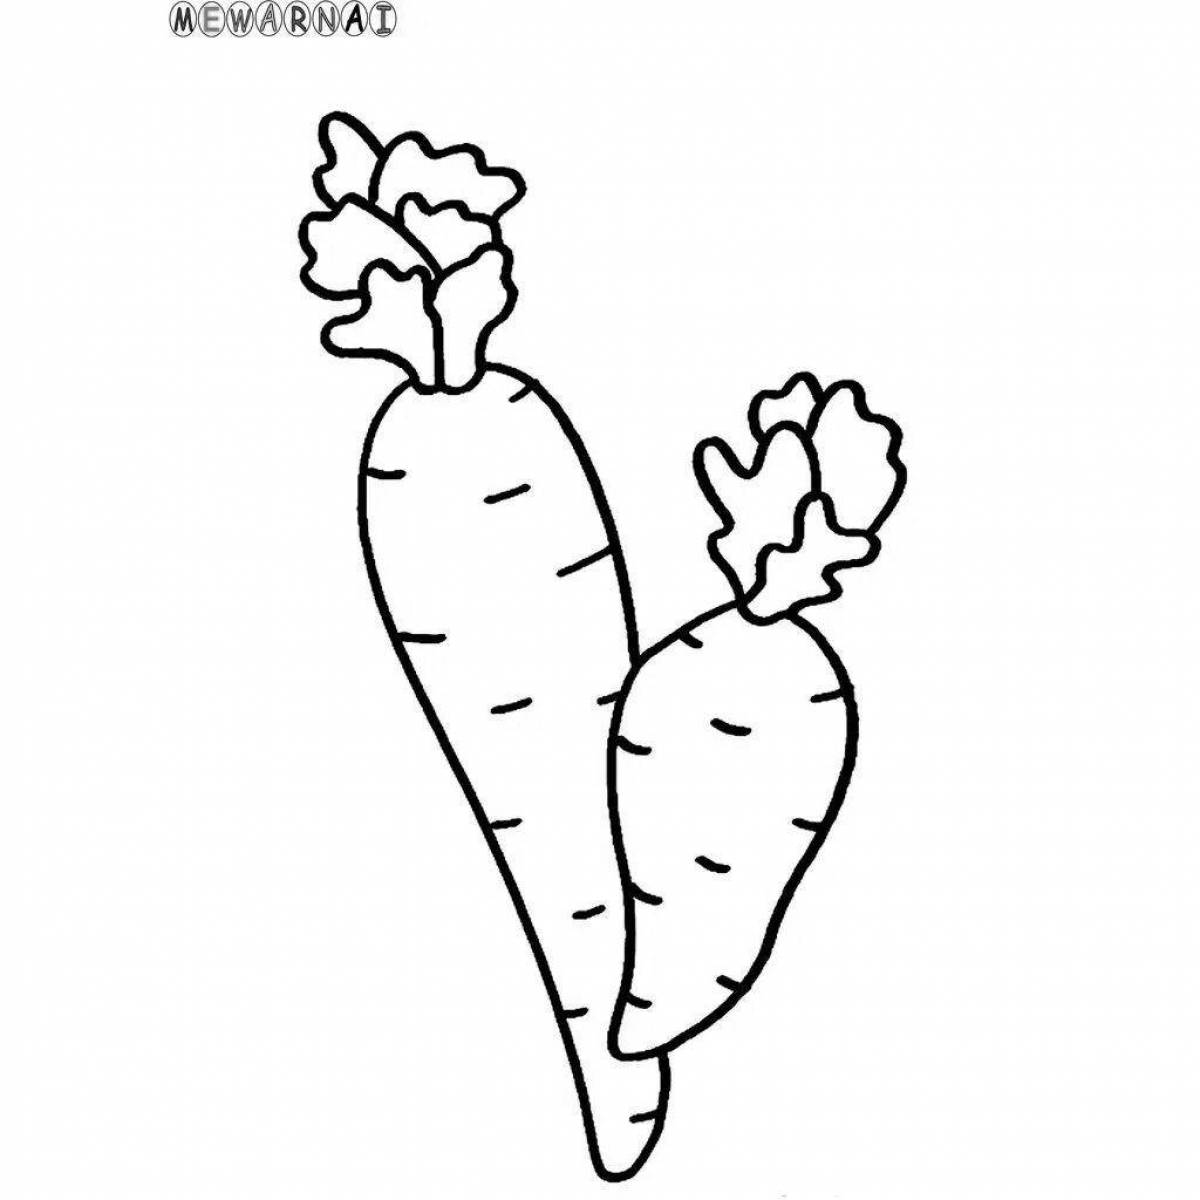 Attractive vegetable coloring book for 3-4 year olds